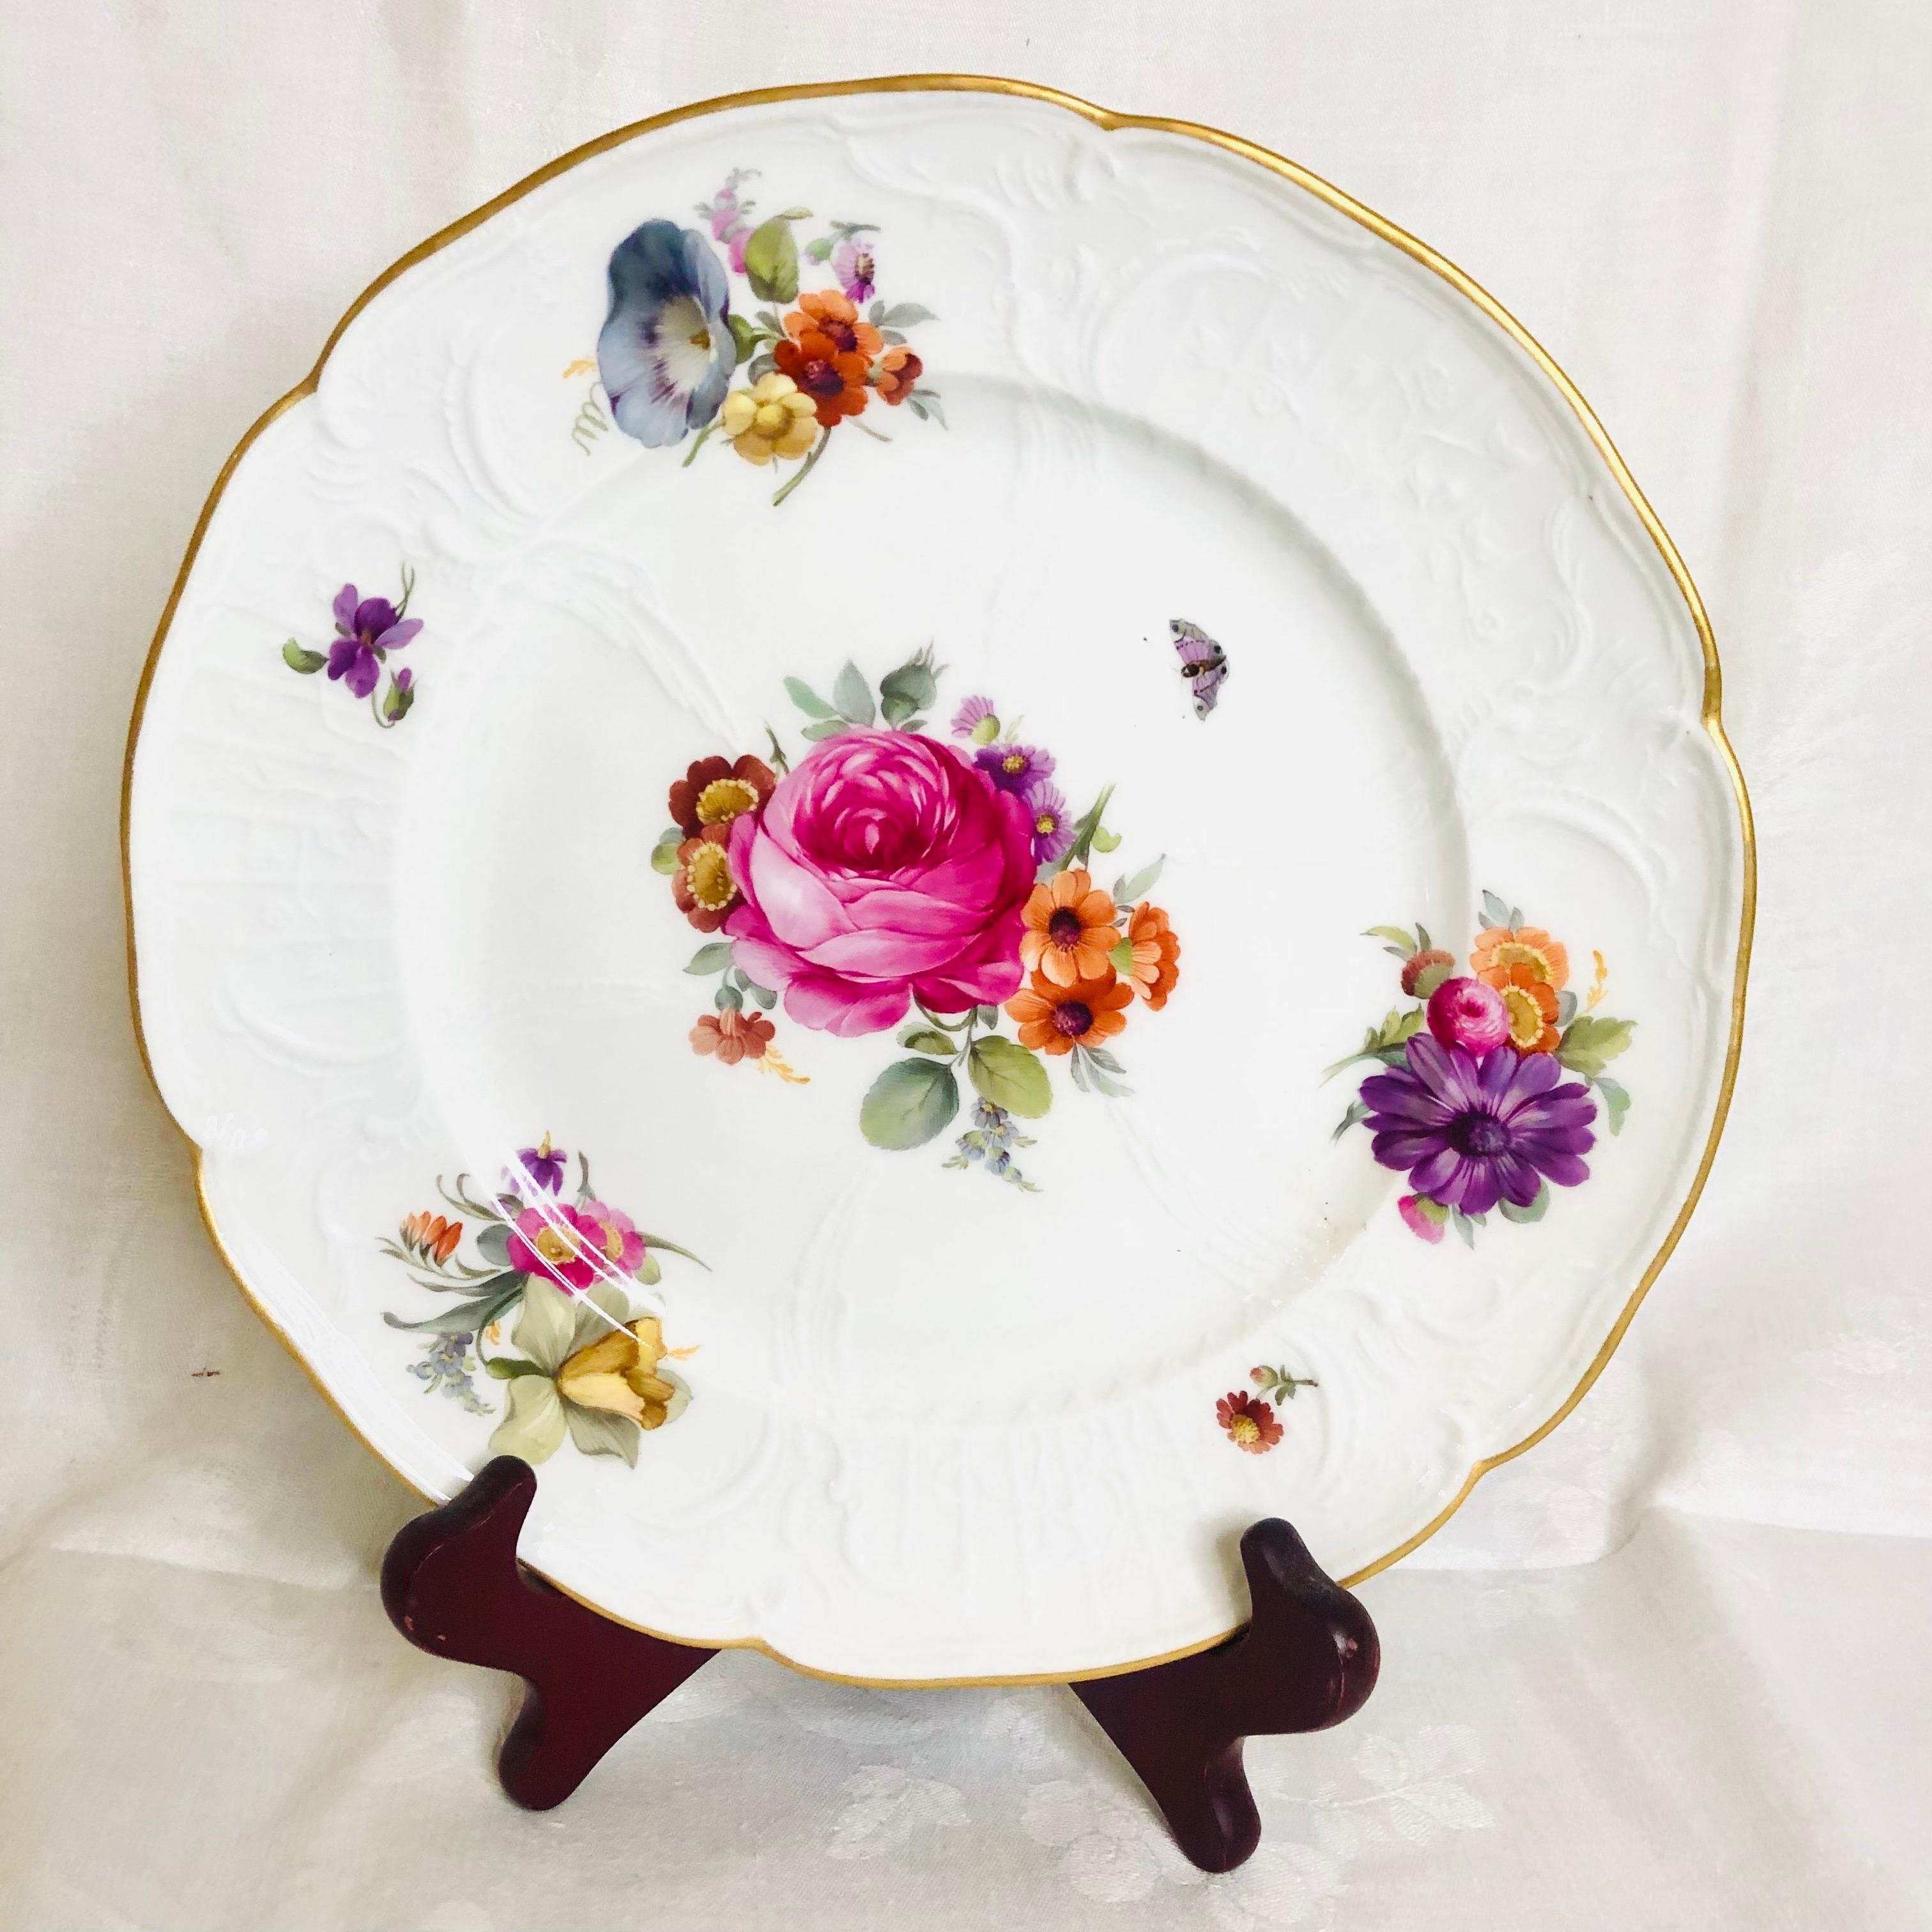 Set of 8 KPM Luncheon Plates Each Hand-Painted with a Different Flower Bouquet For Sale 4